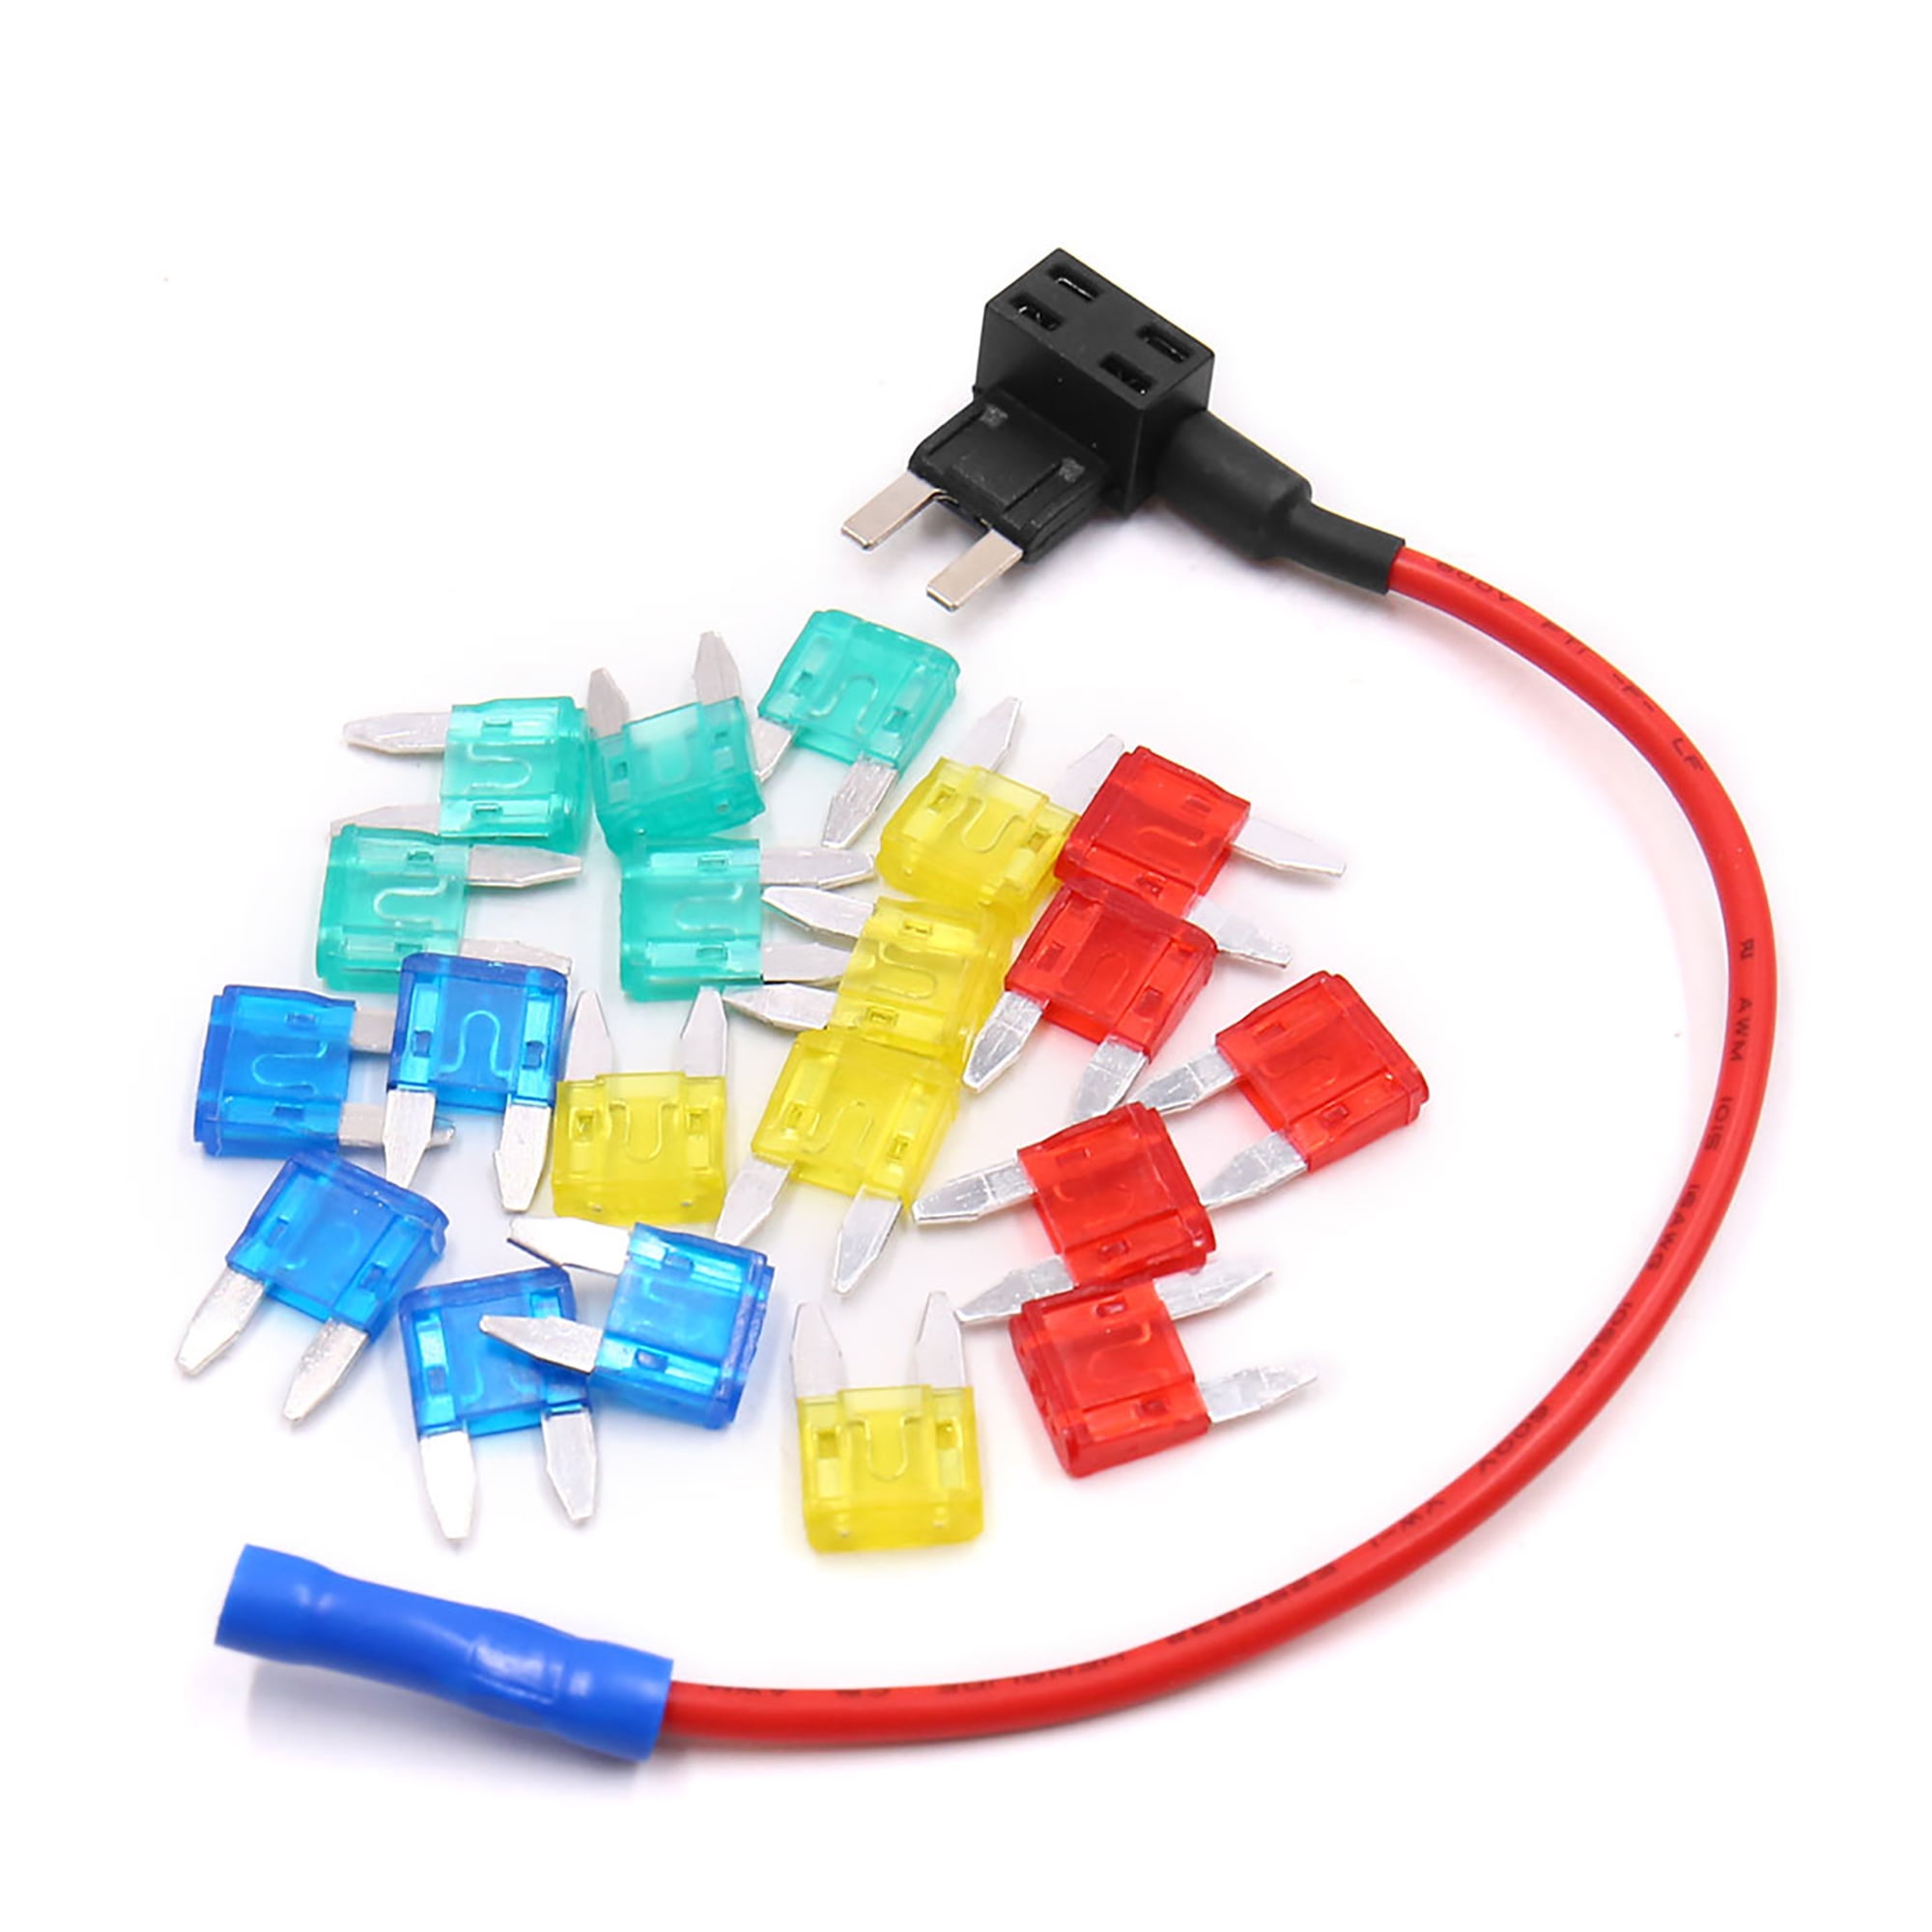 15x Add A Circuit Piggy Back Fuse Tap MICRO 2 Blade Holder 12V Car Motor Motoped 